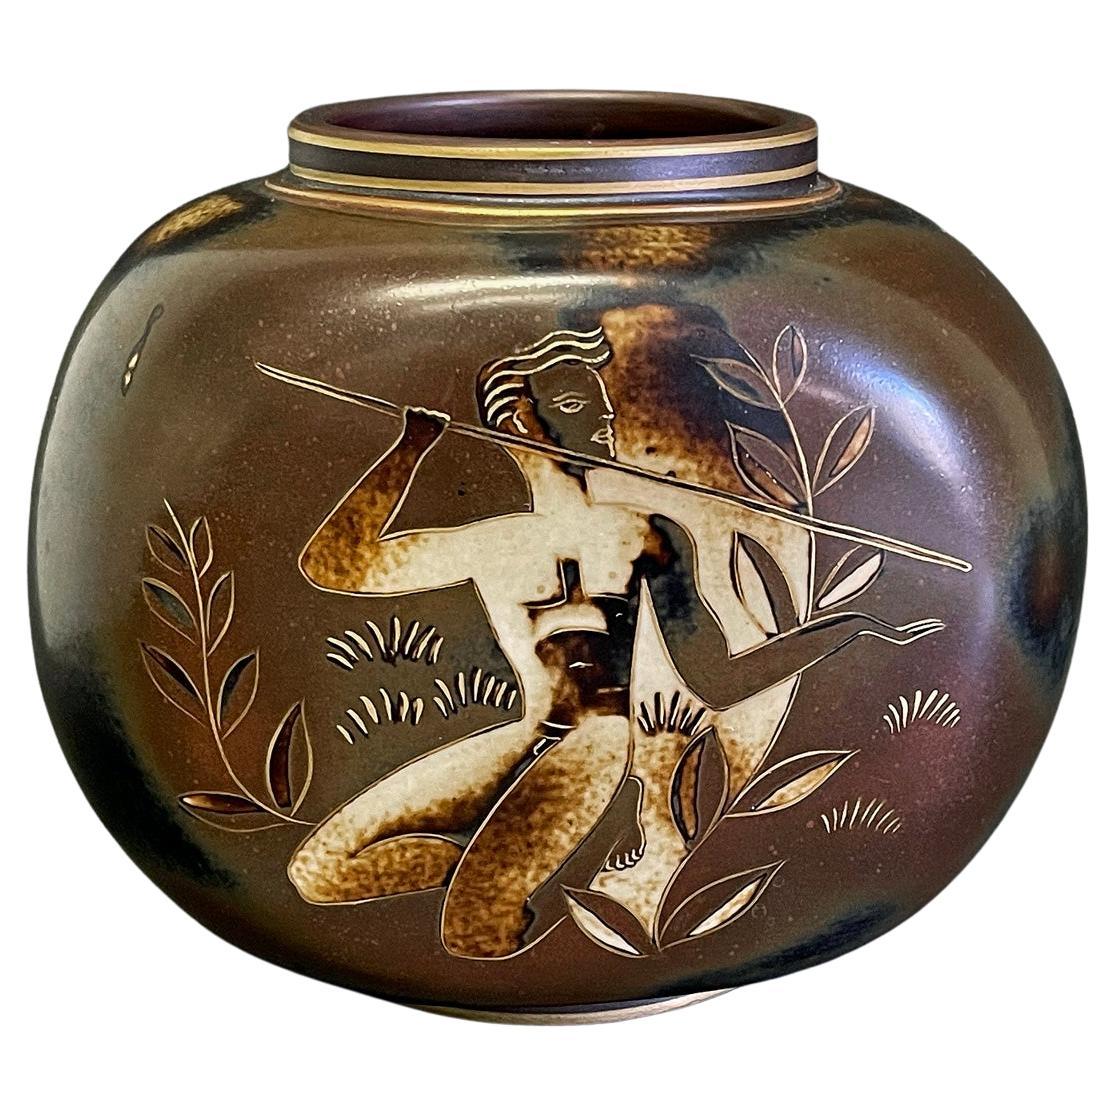 "Nude with Spear, " Unique Art Deco Vase with Male Nude, Gold Highlights